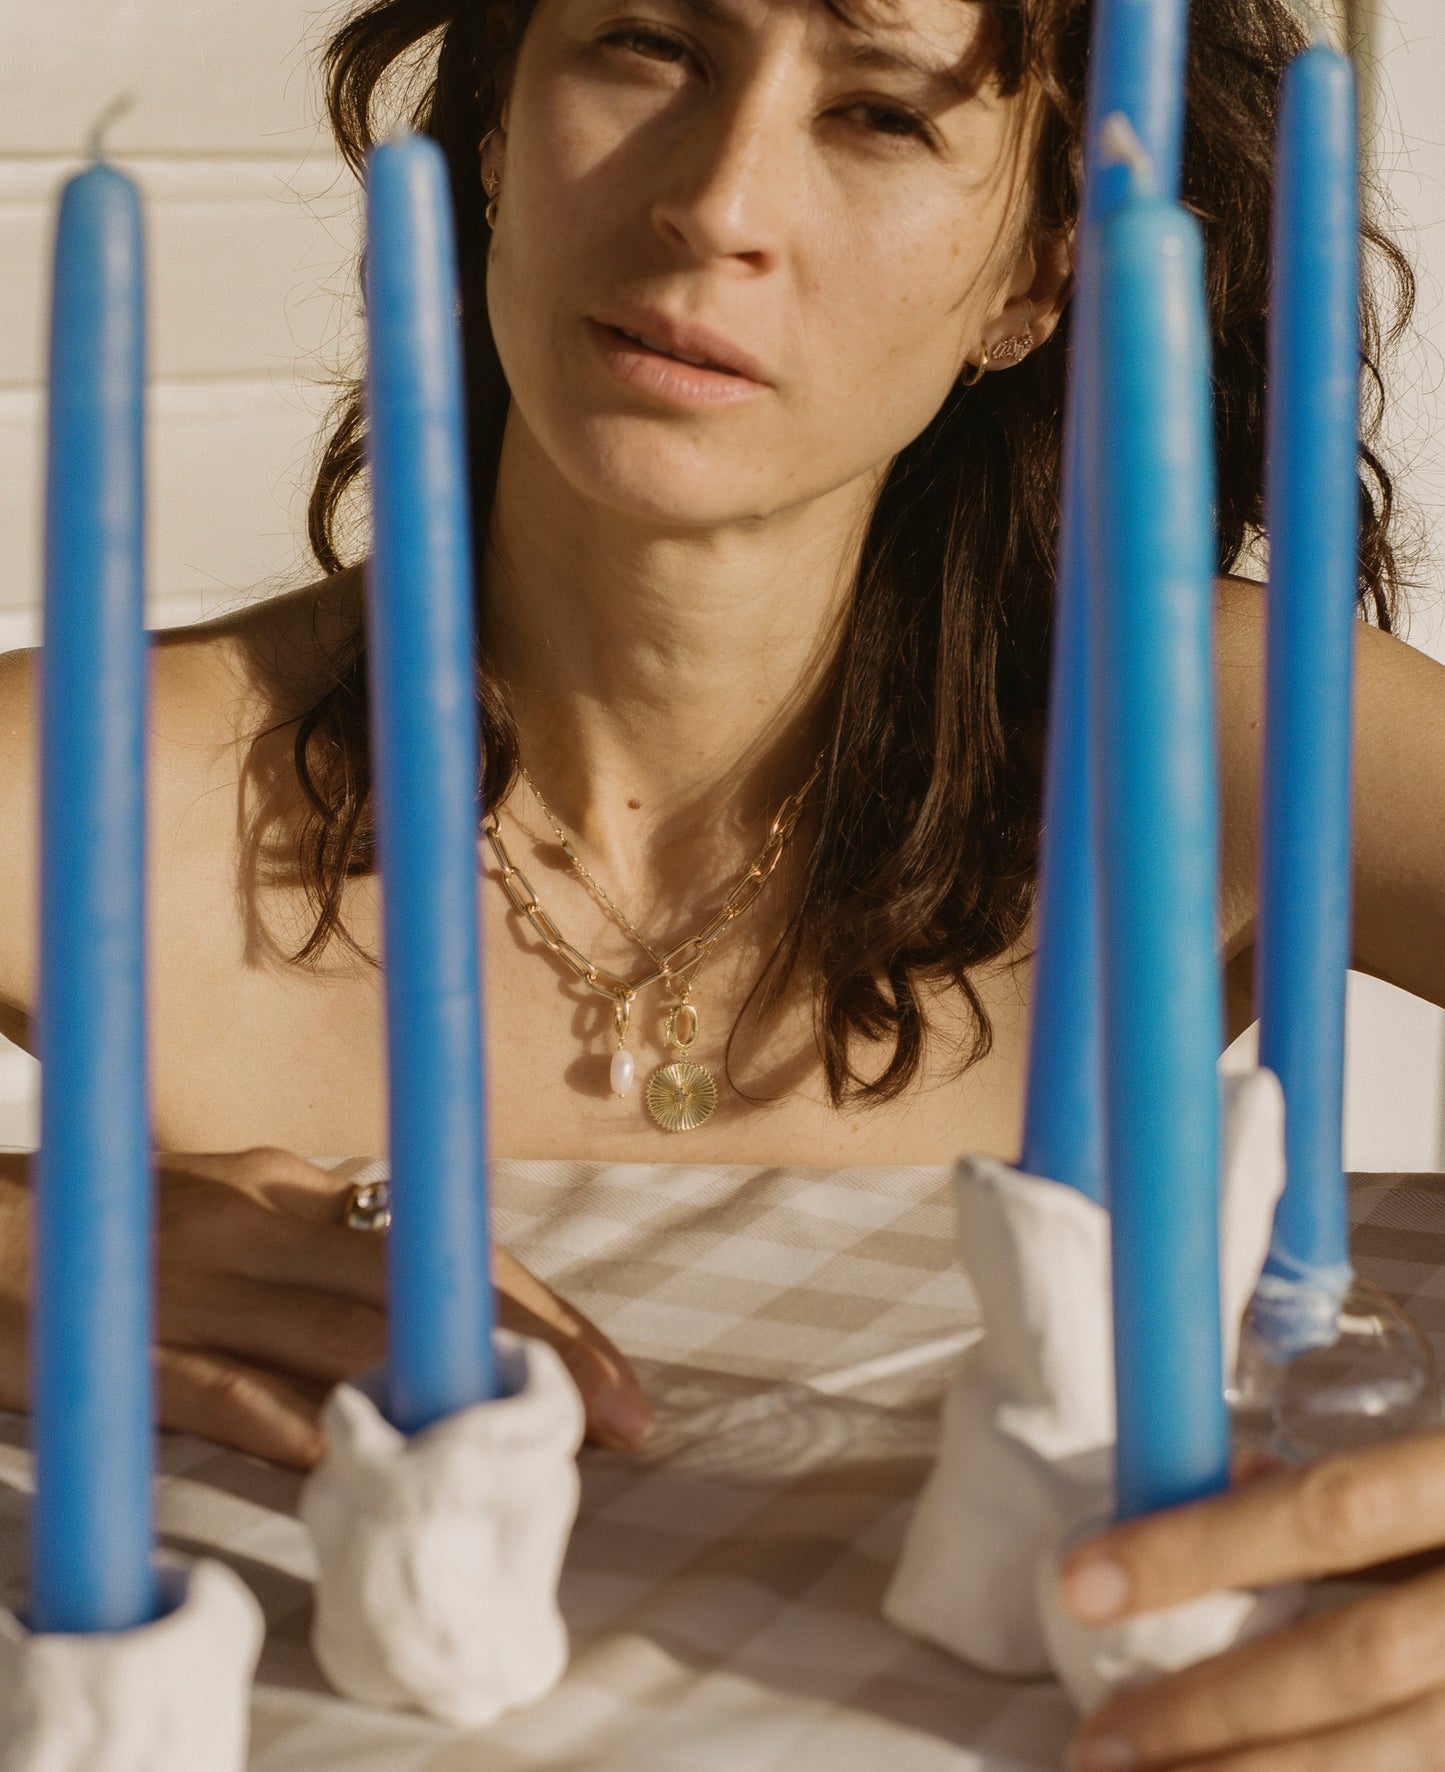 Woman wearing golden necklaces behind blue candles